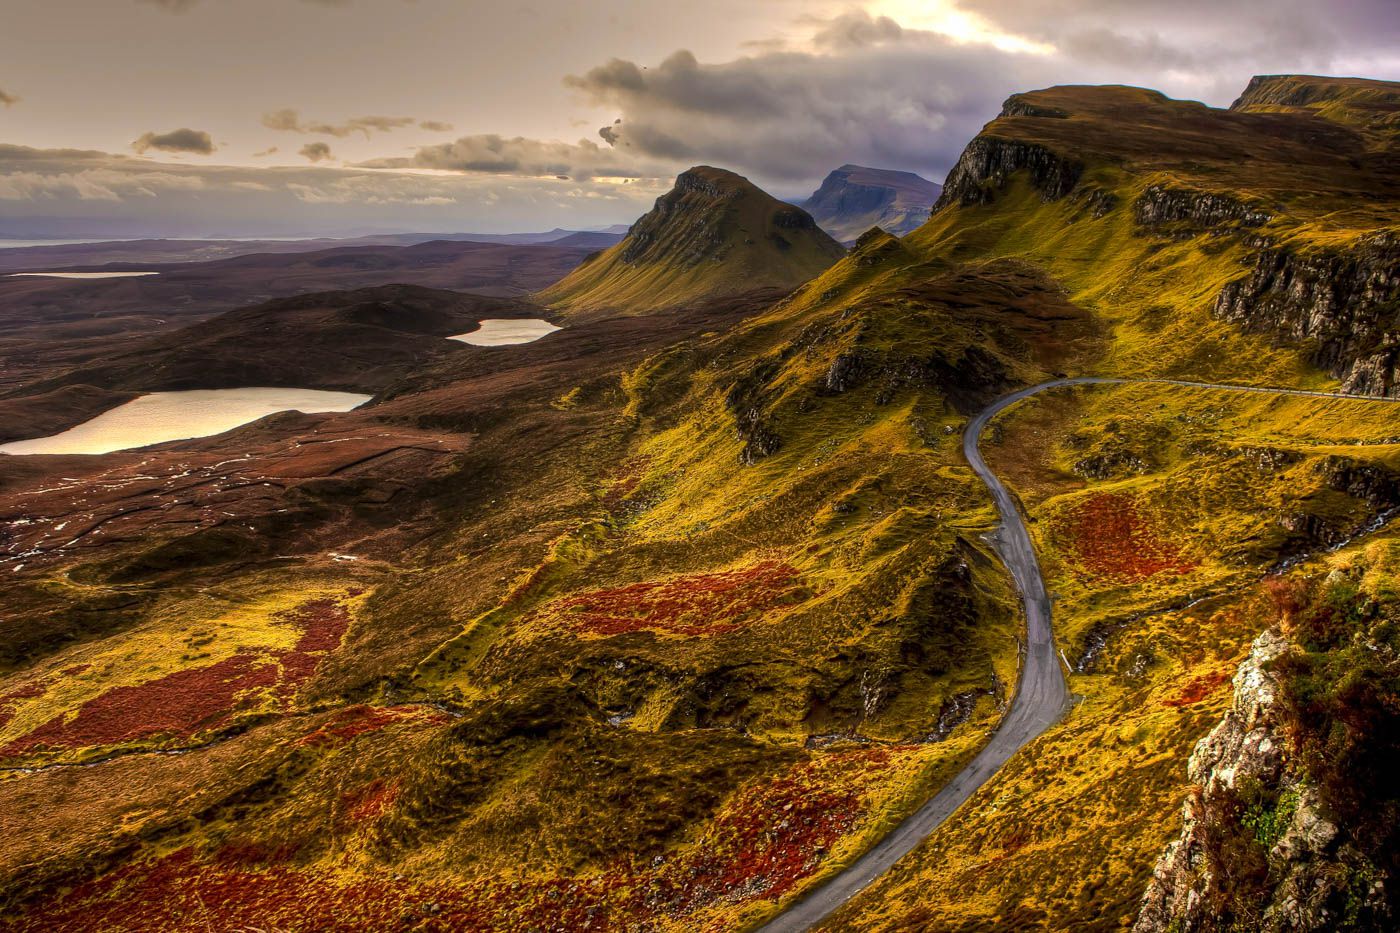 Scotland Travel Costs & Prices - Lochs, Highlands, and the Great Glen